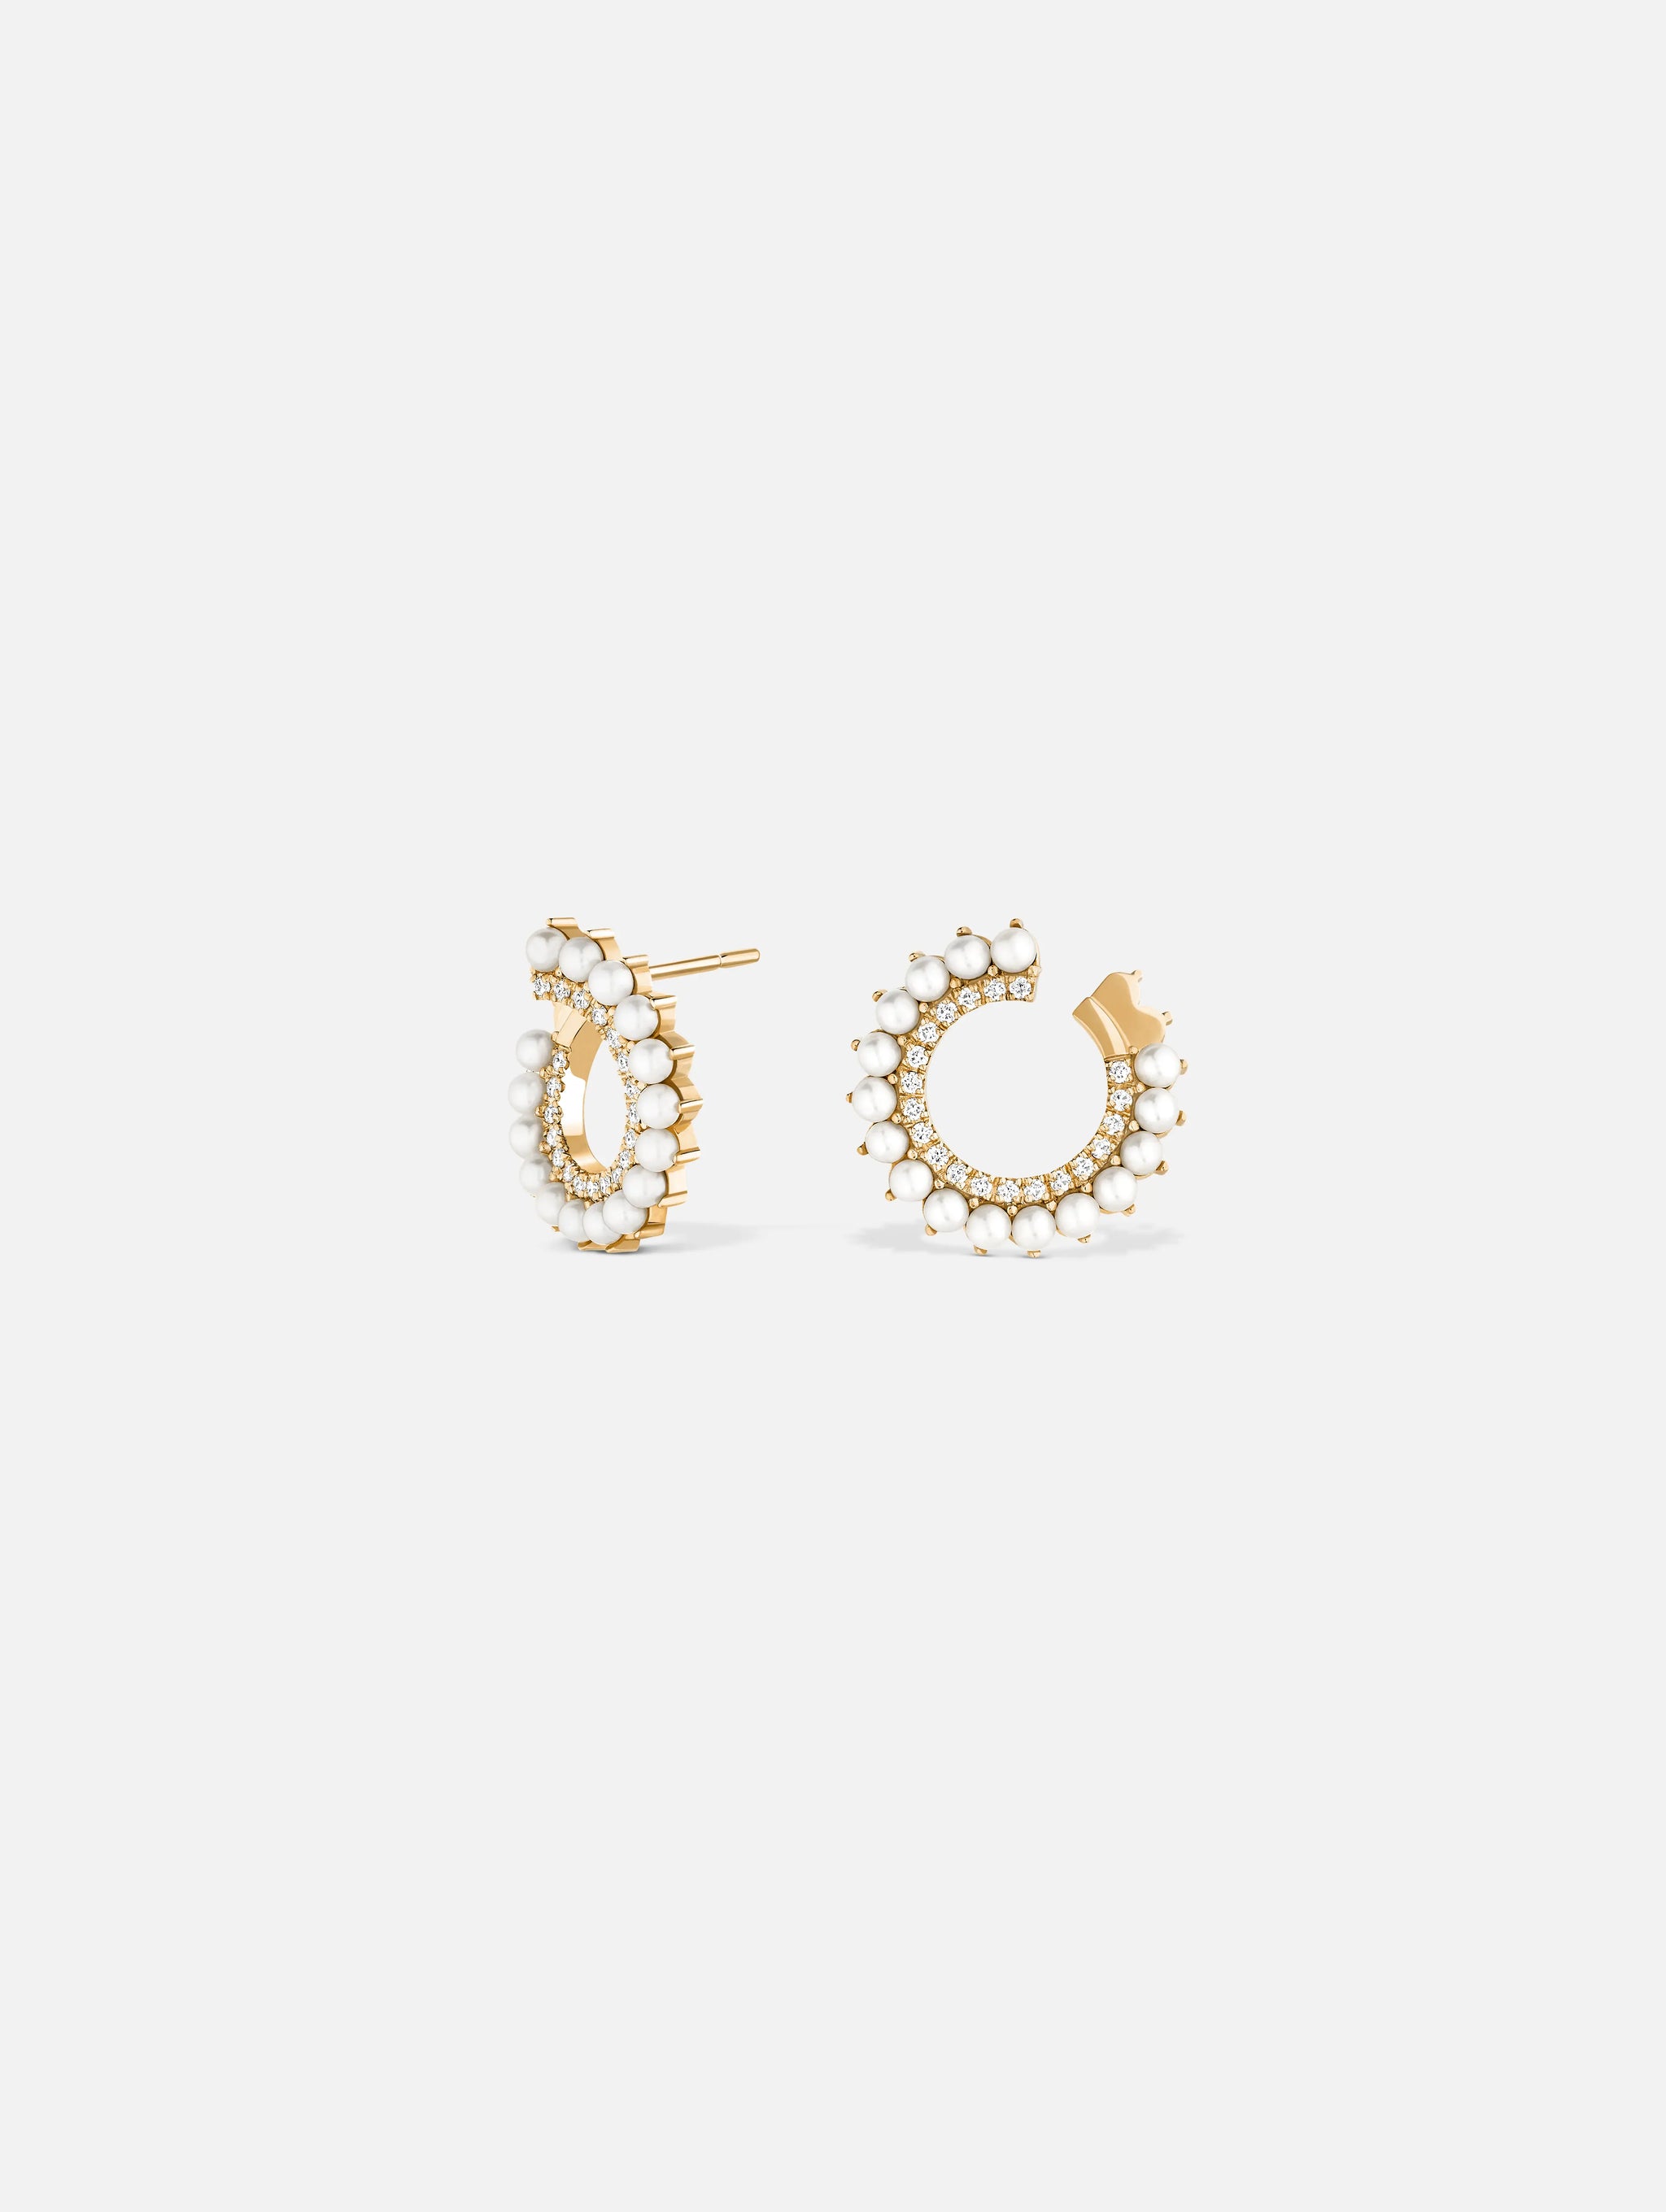 Pearl Earrings in Yellow Gold - 1 - Nouvel Heritage